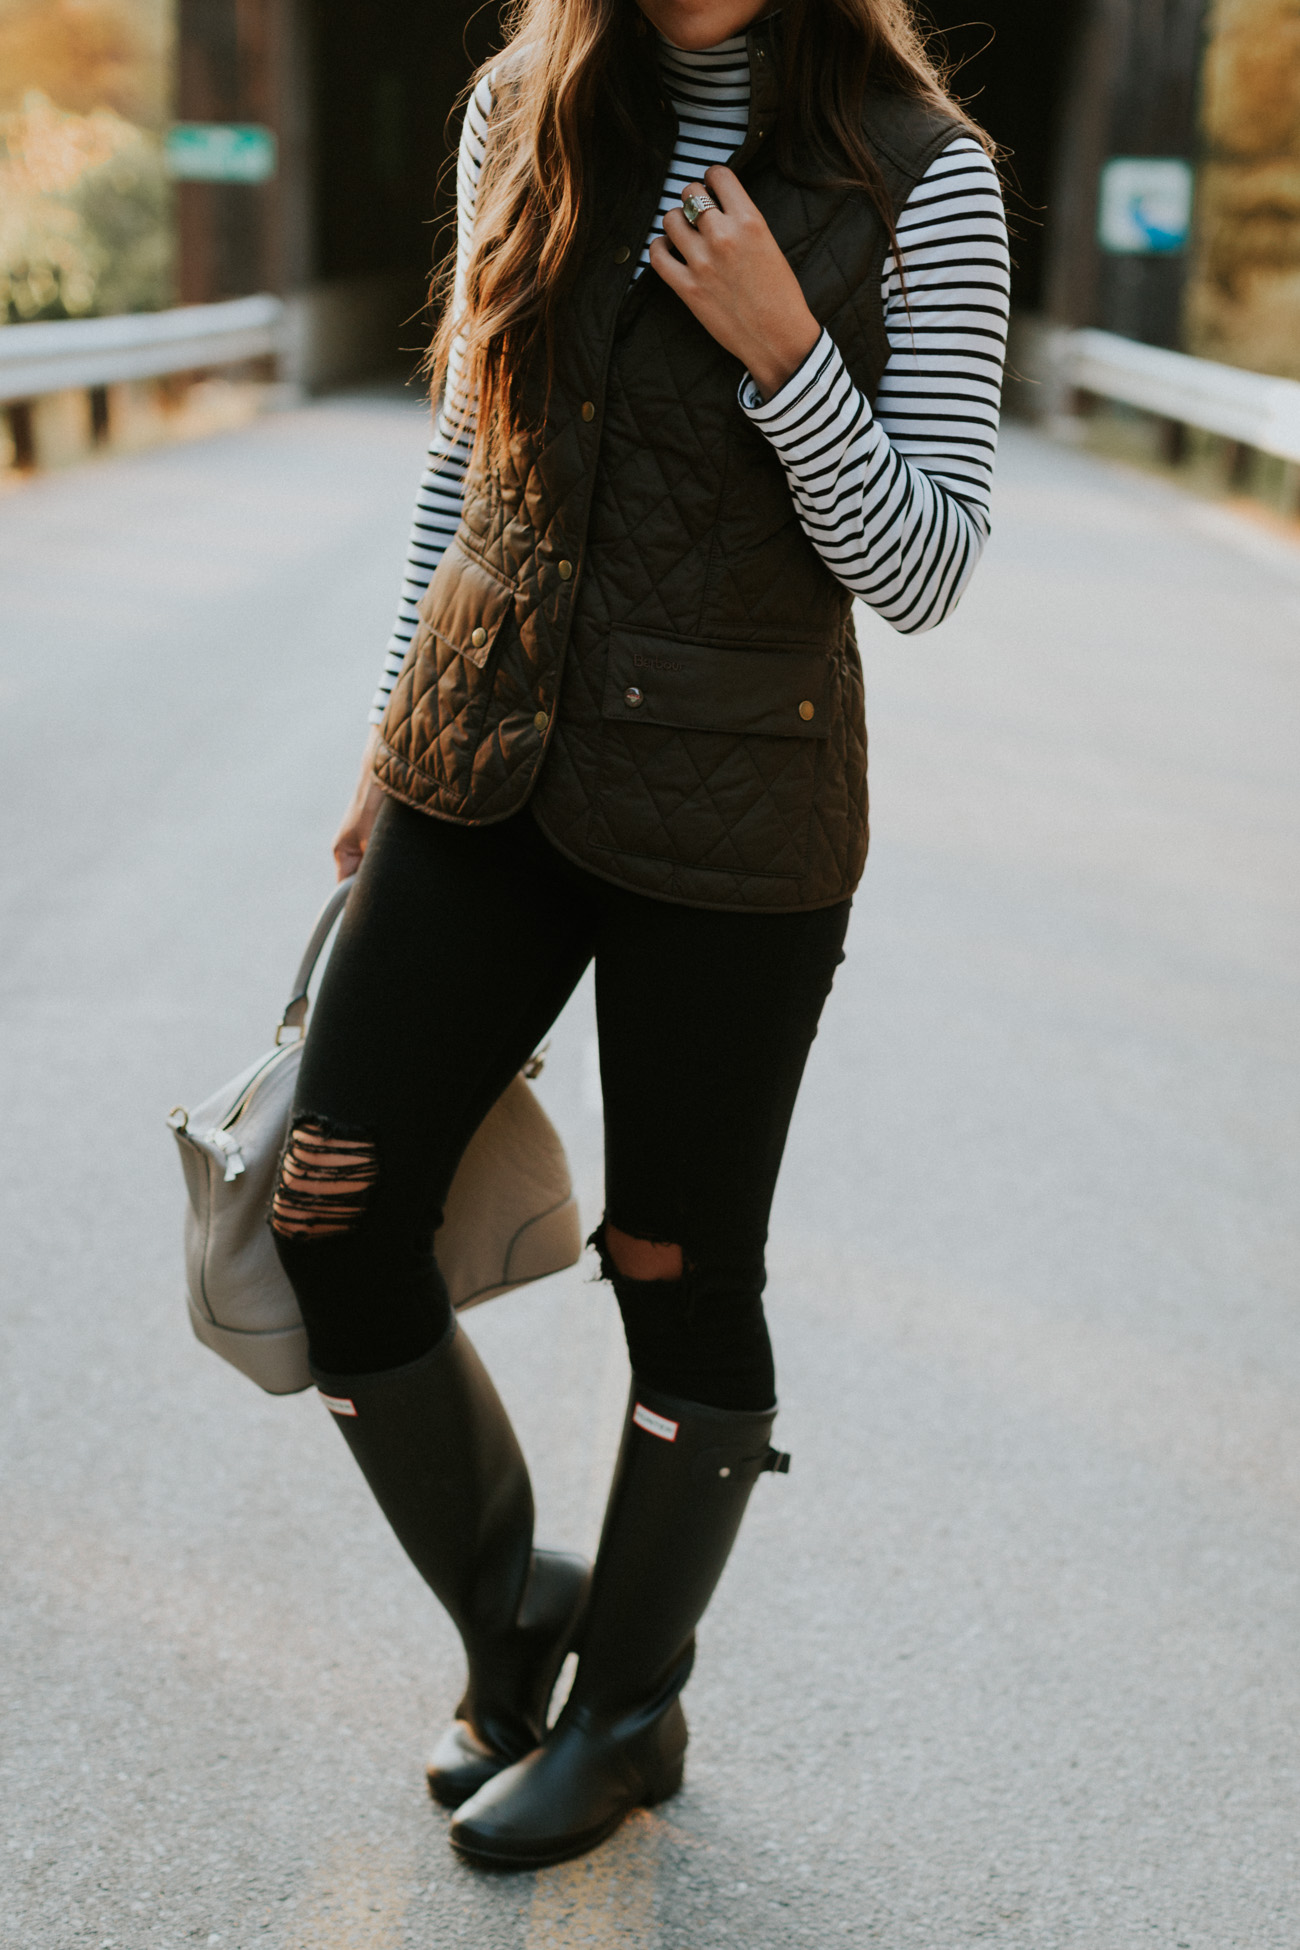 Barbour Quilted Vest | A Southern Drawl1300 x 1950